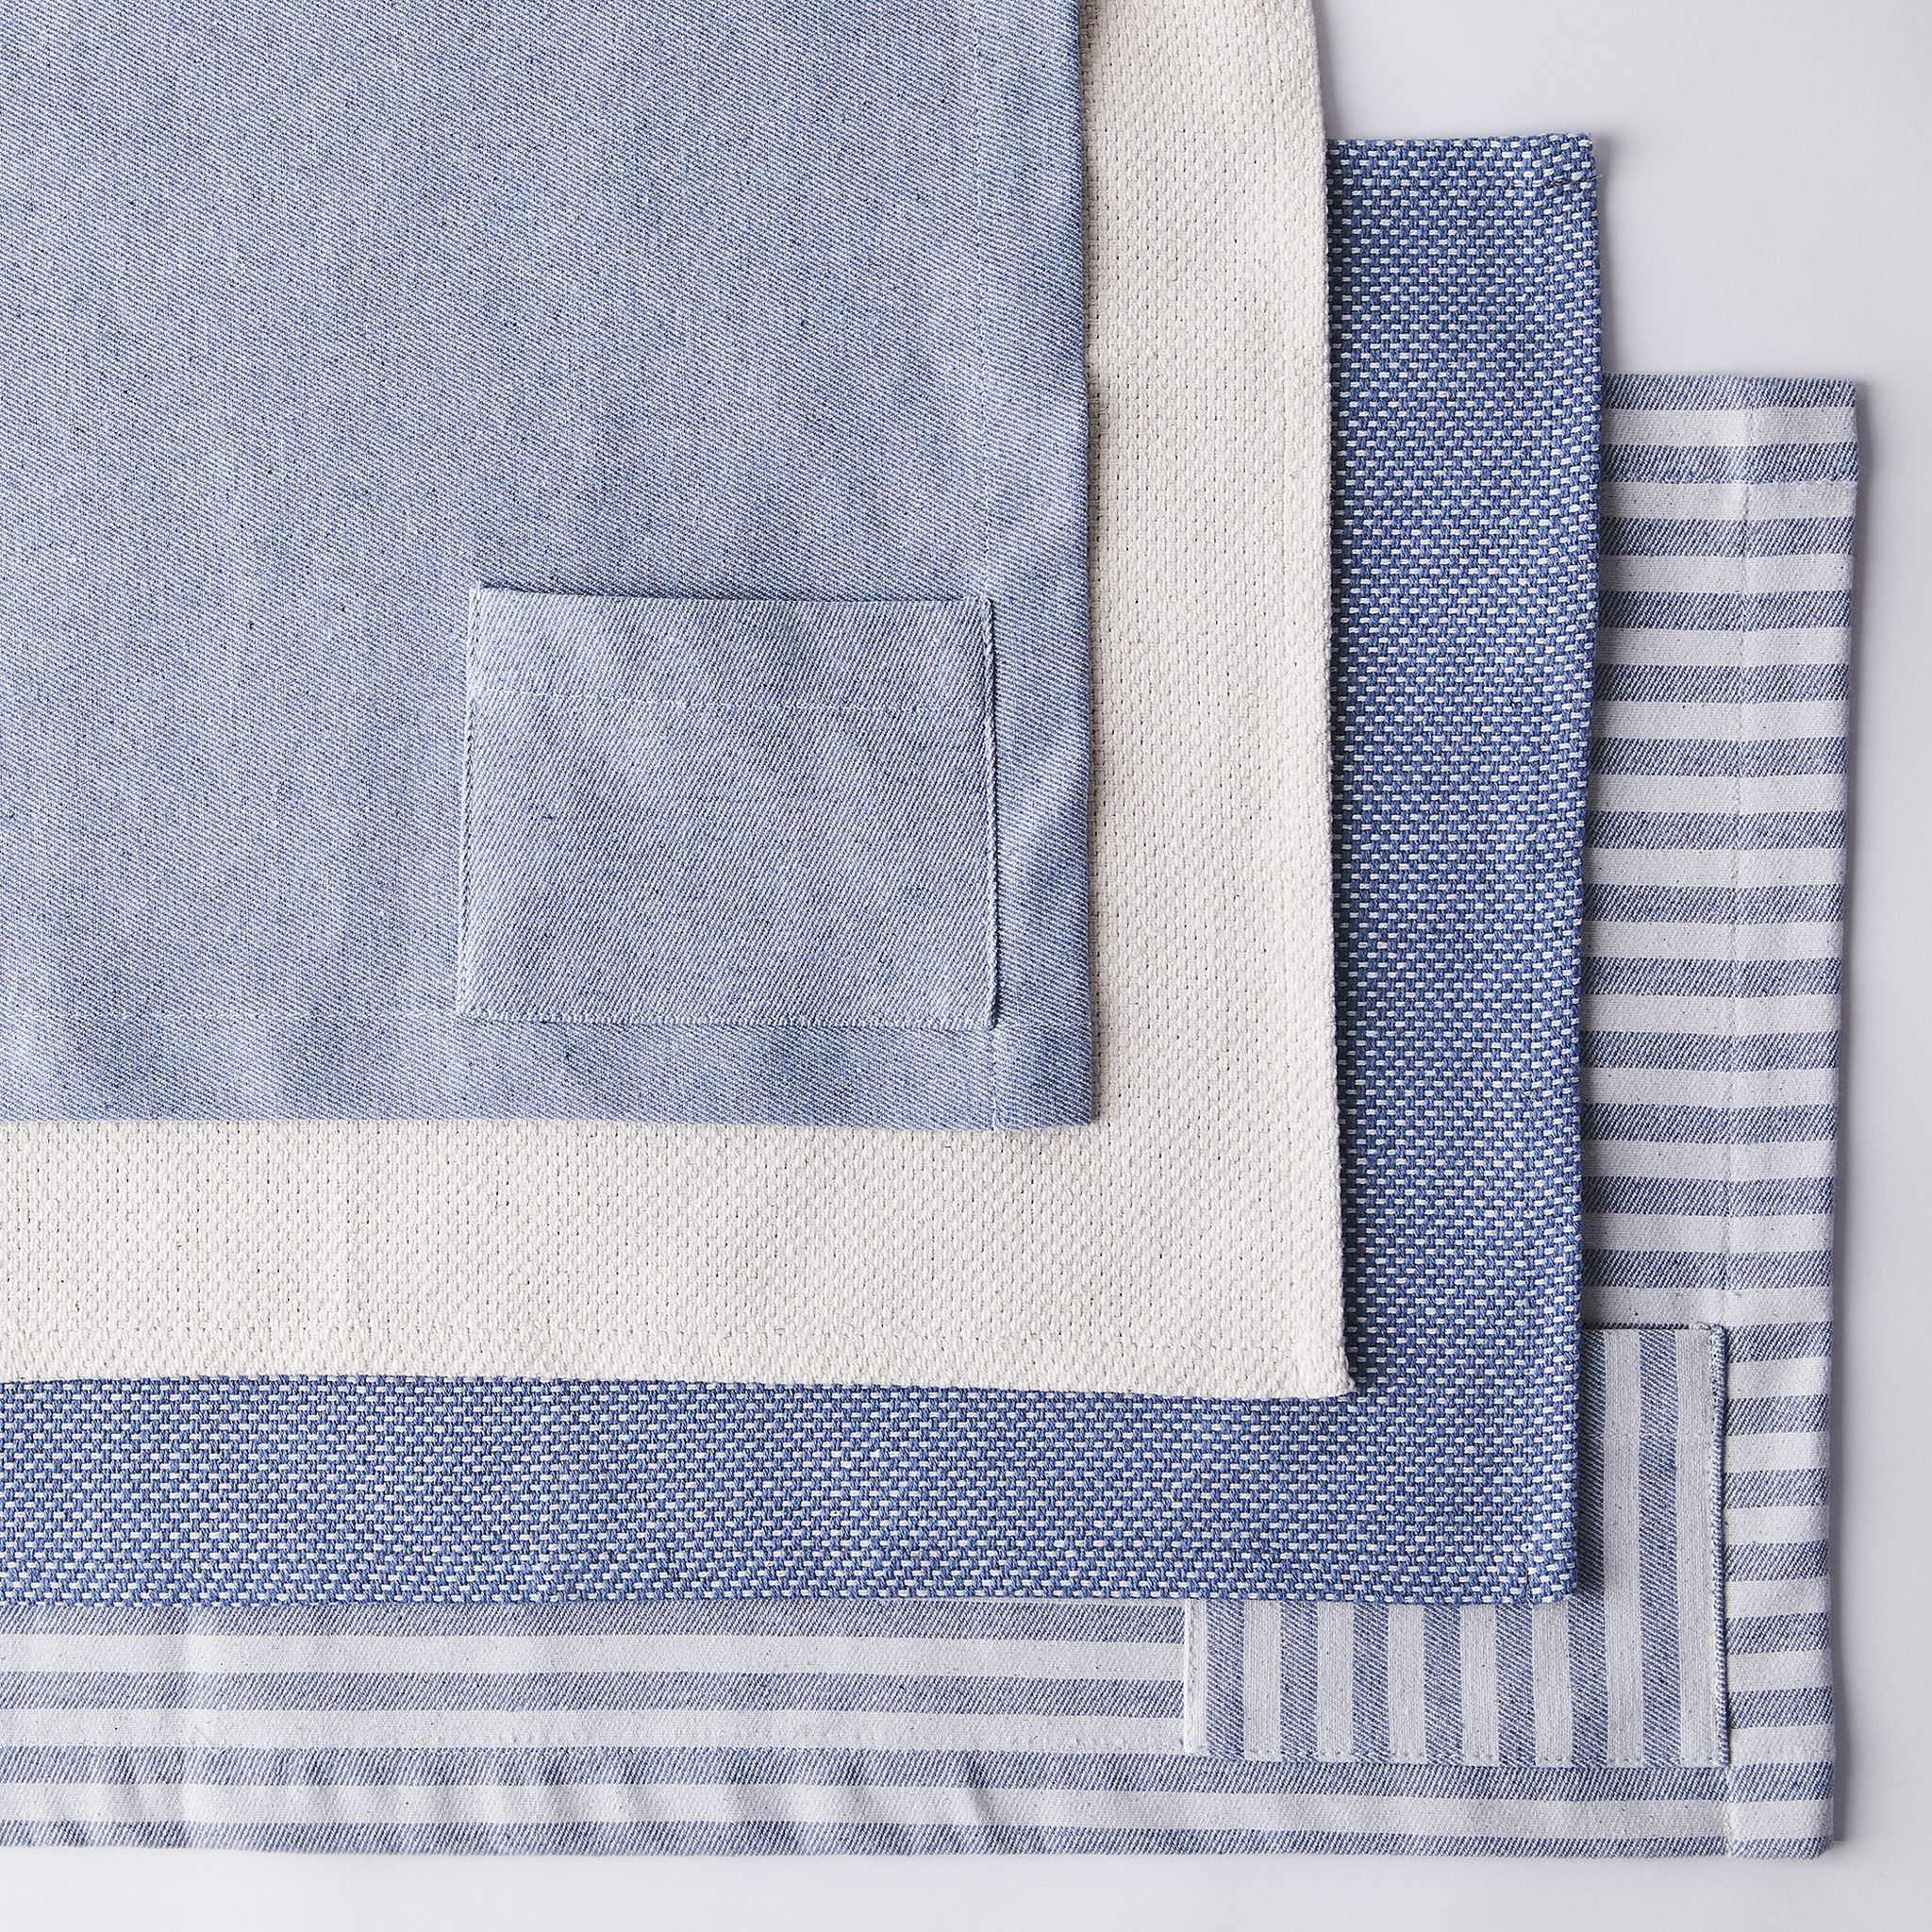 Upcycled Denim Cotton Placemats (Set of 4)